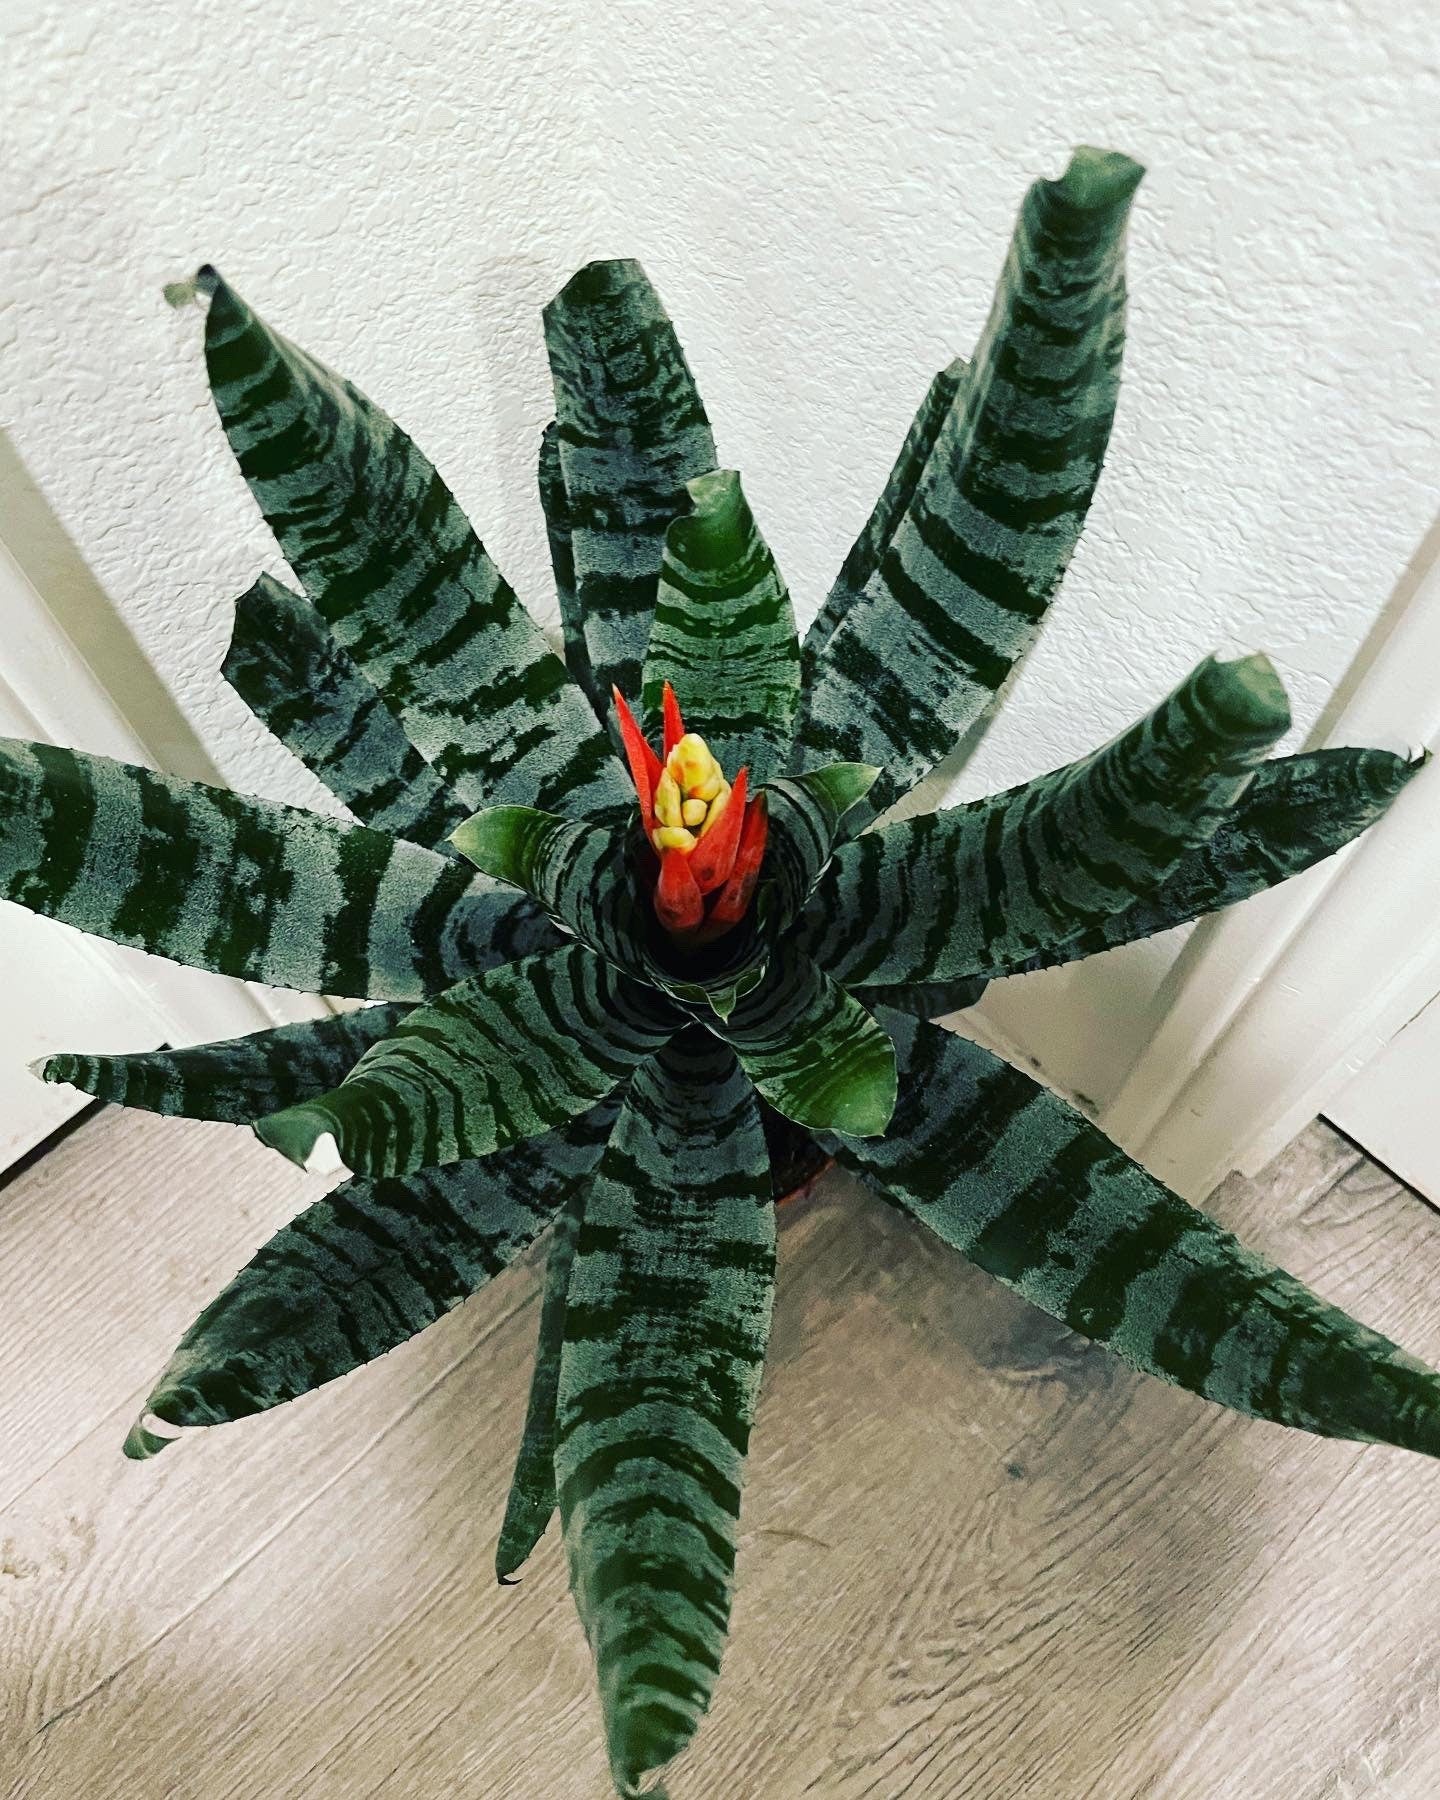 XL- 1ft-Variegated Bromeliad- easy care keep water in flower cup! hard to find Rare! Aechmea chantinii black-Rebecca